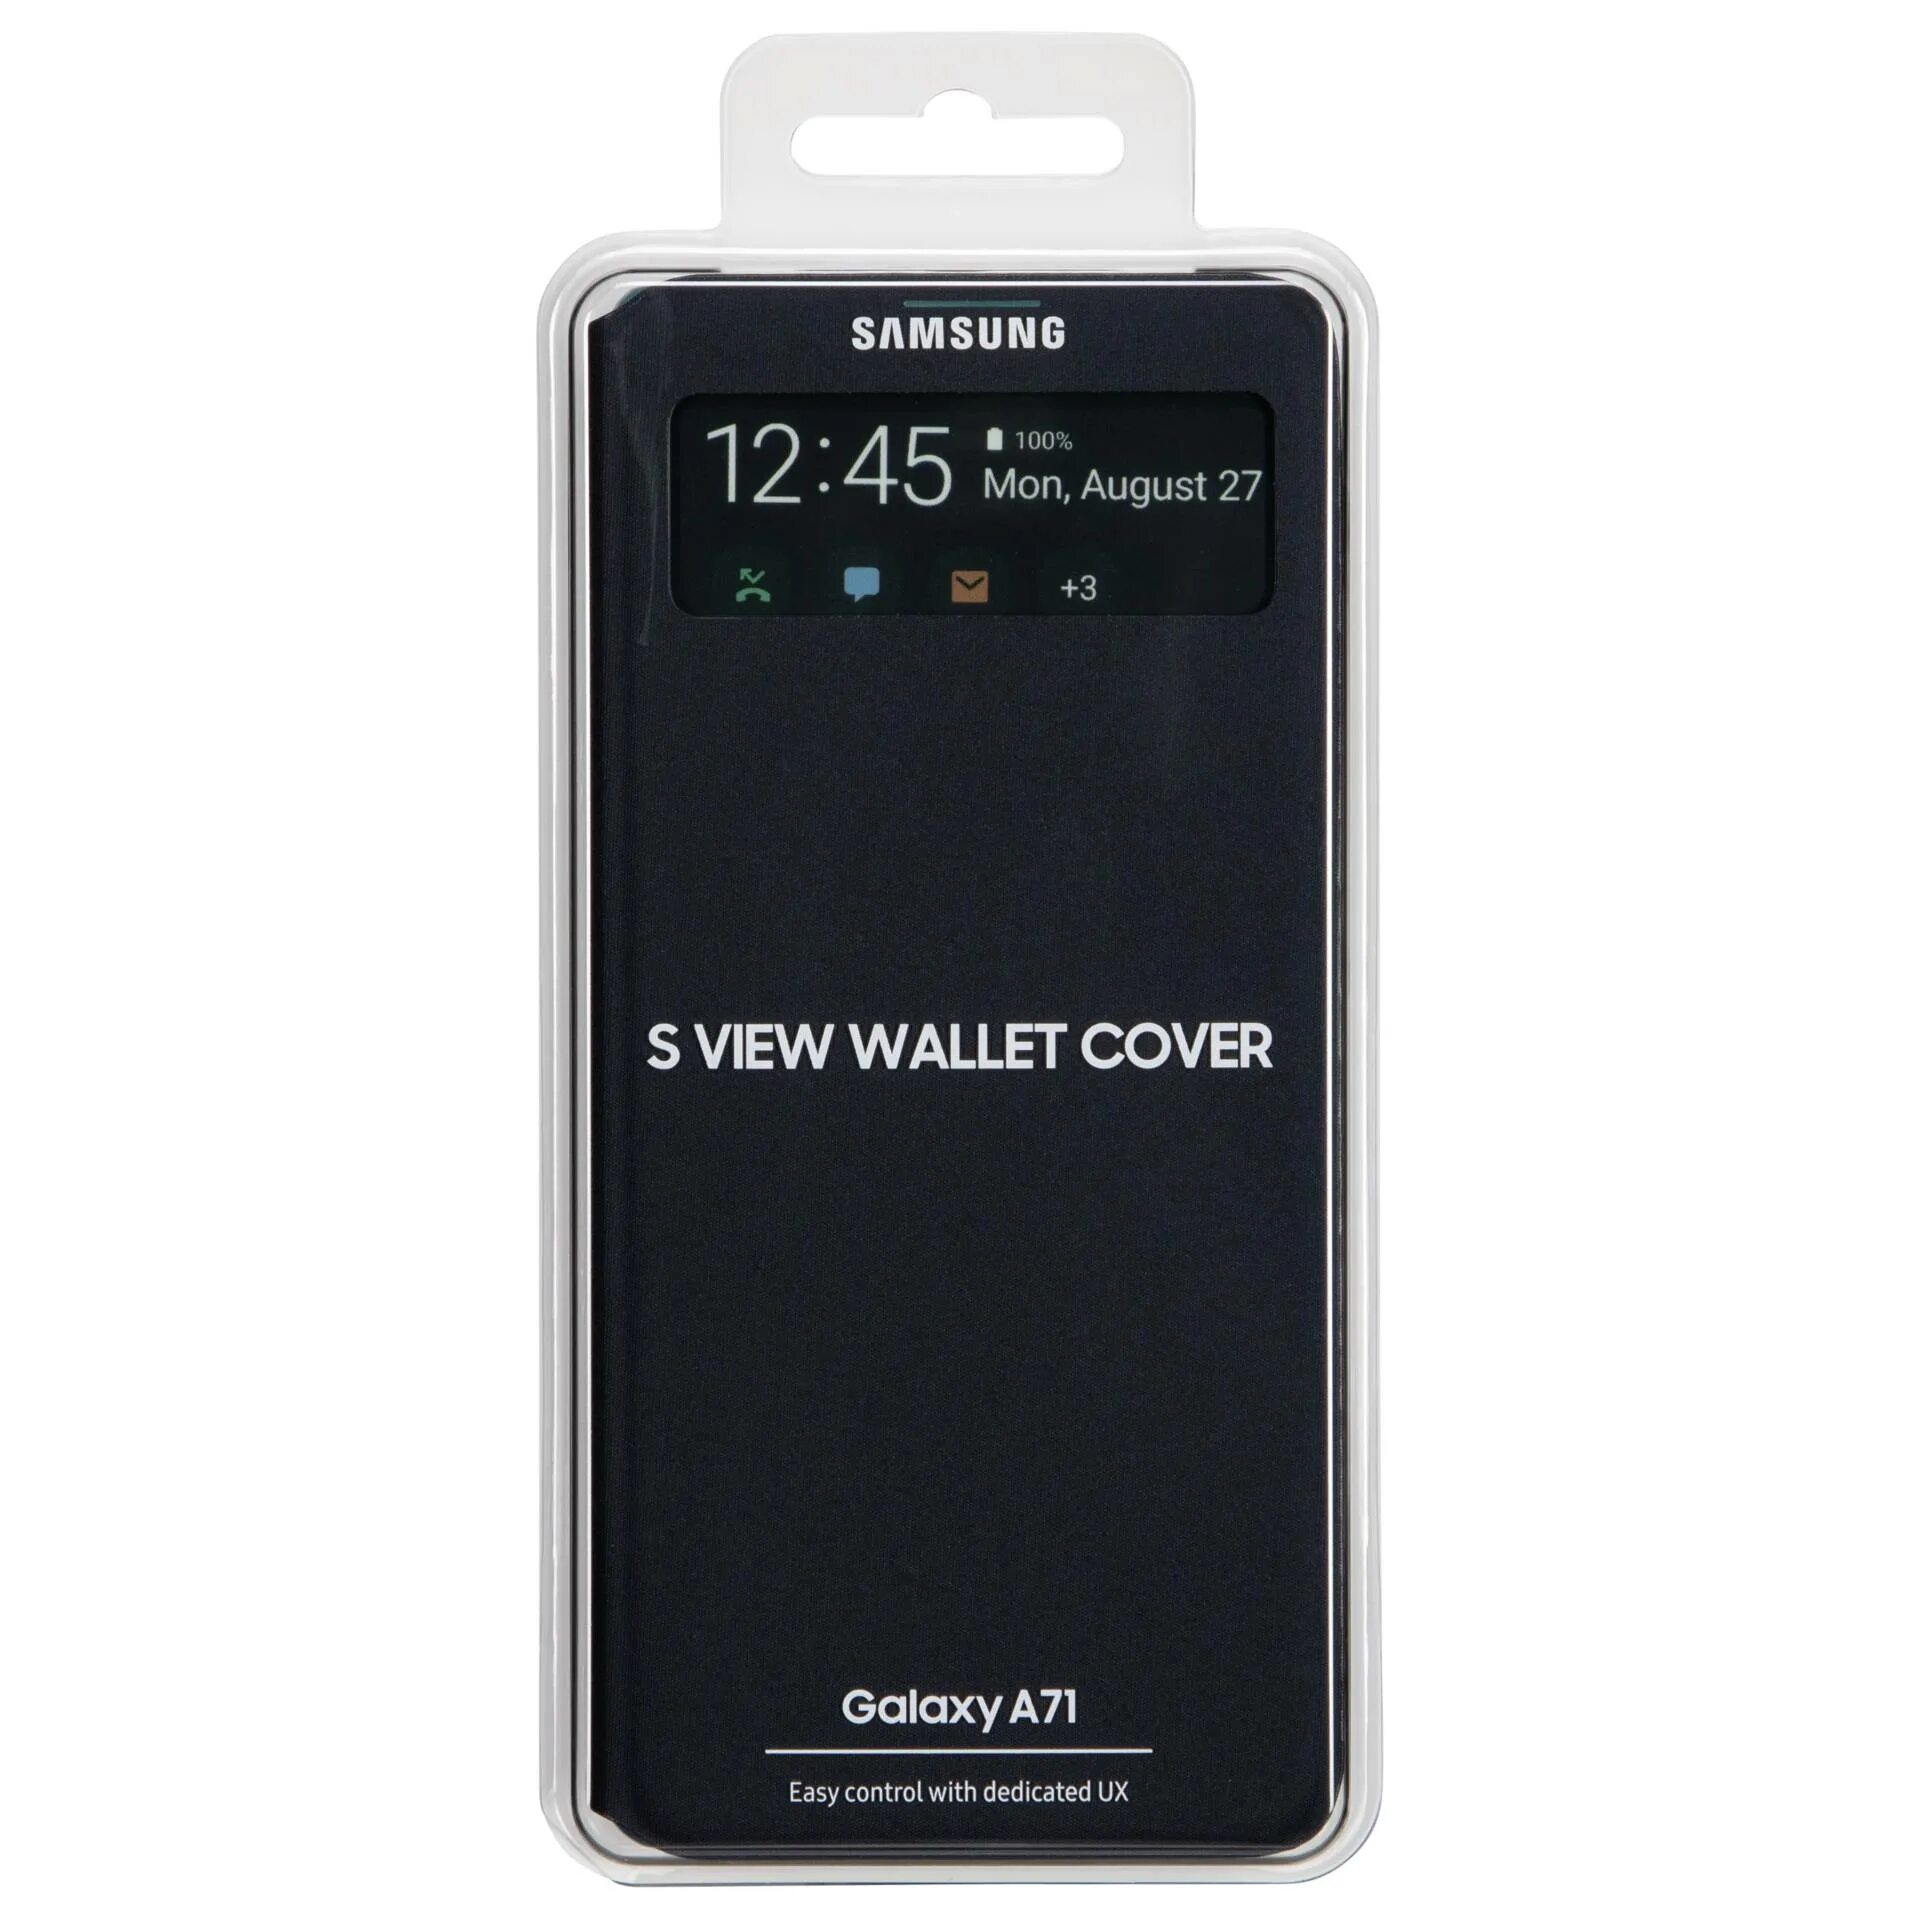 Samsung s wallet. Samsung Smart s view Wallet Cover a32. Samsung s view Wallet Cover a71. Samsung s view Wallet Cover для a51. Samsung Galaxy a71 s view Wallet Cover.